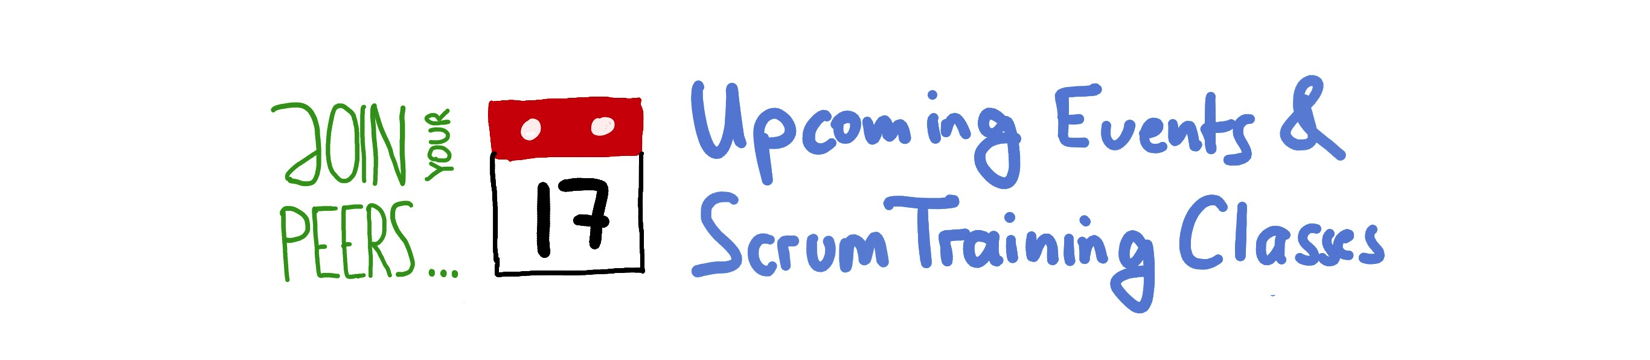 📅 Schulungstermine für Professional Scrum Master, Remote Agile und Liberating Structures Training — Berlin Product People GmbH